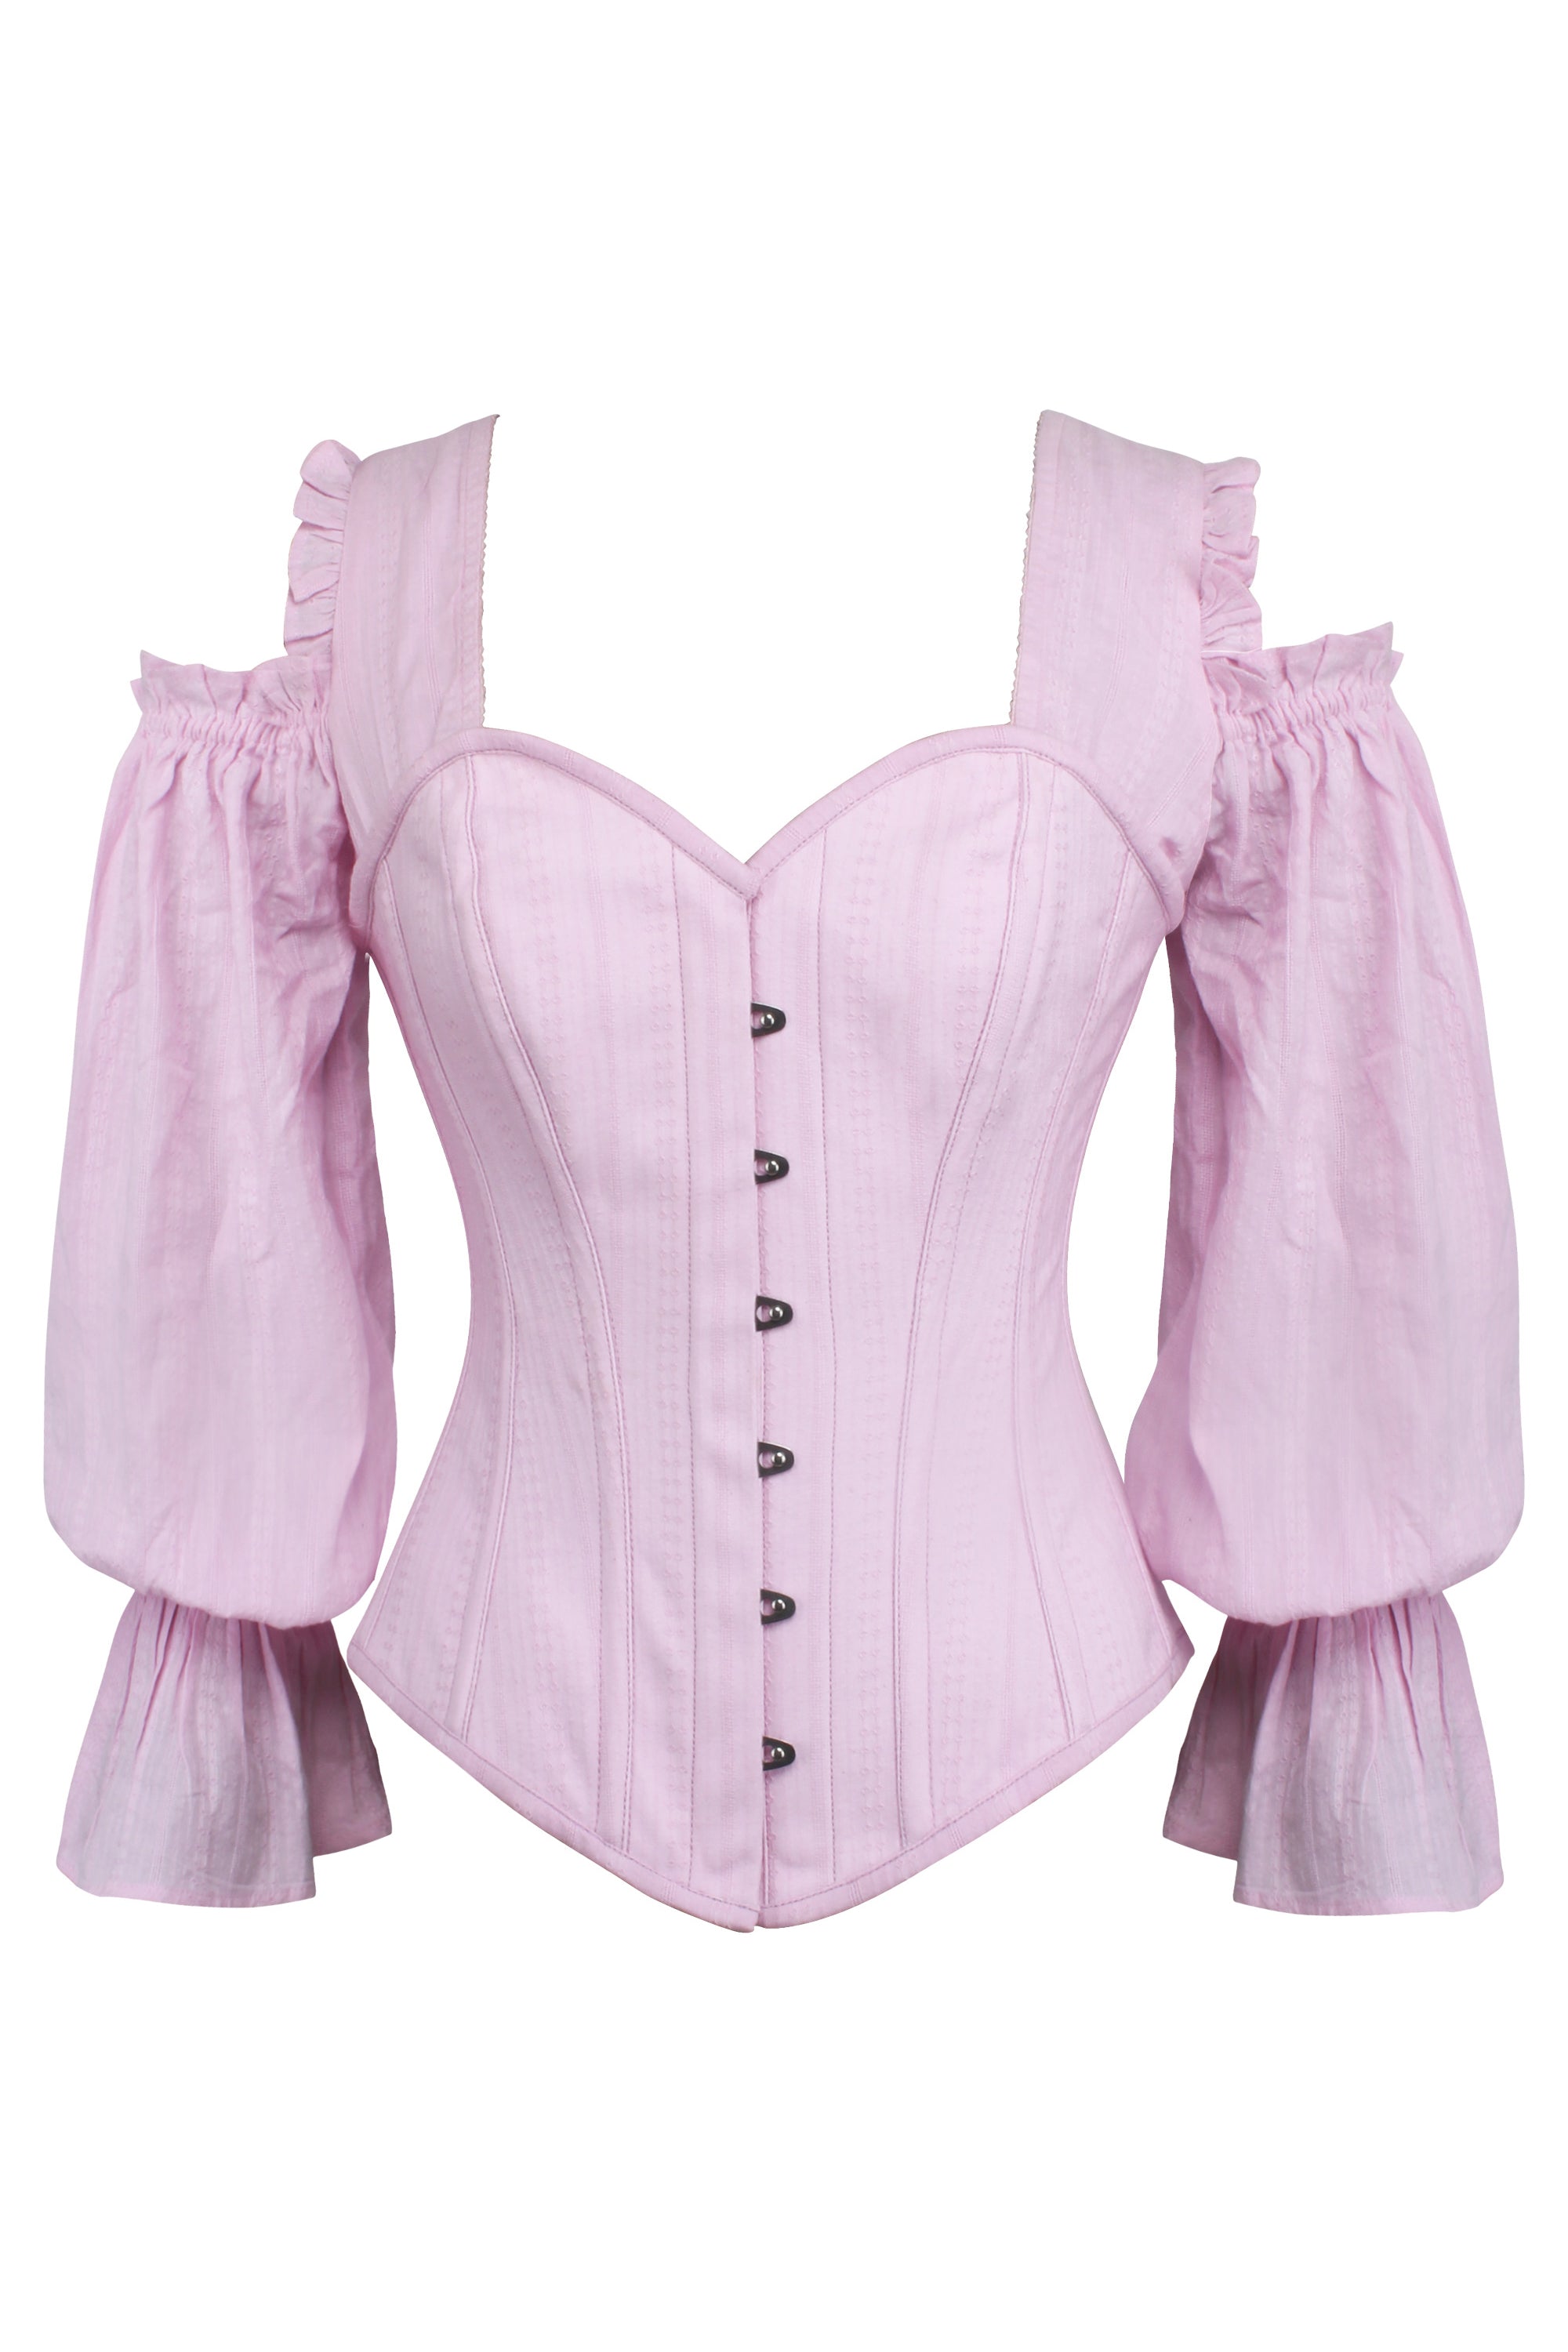 Pink Corset Top with Long Sleeves and a Cold Shoulder